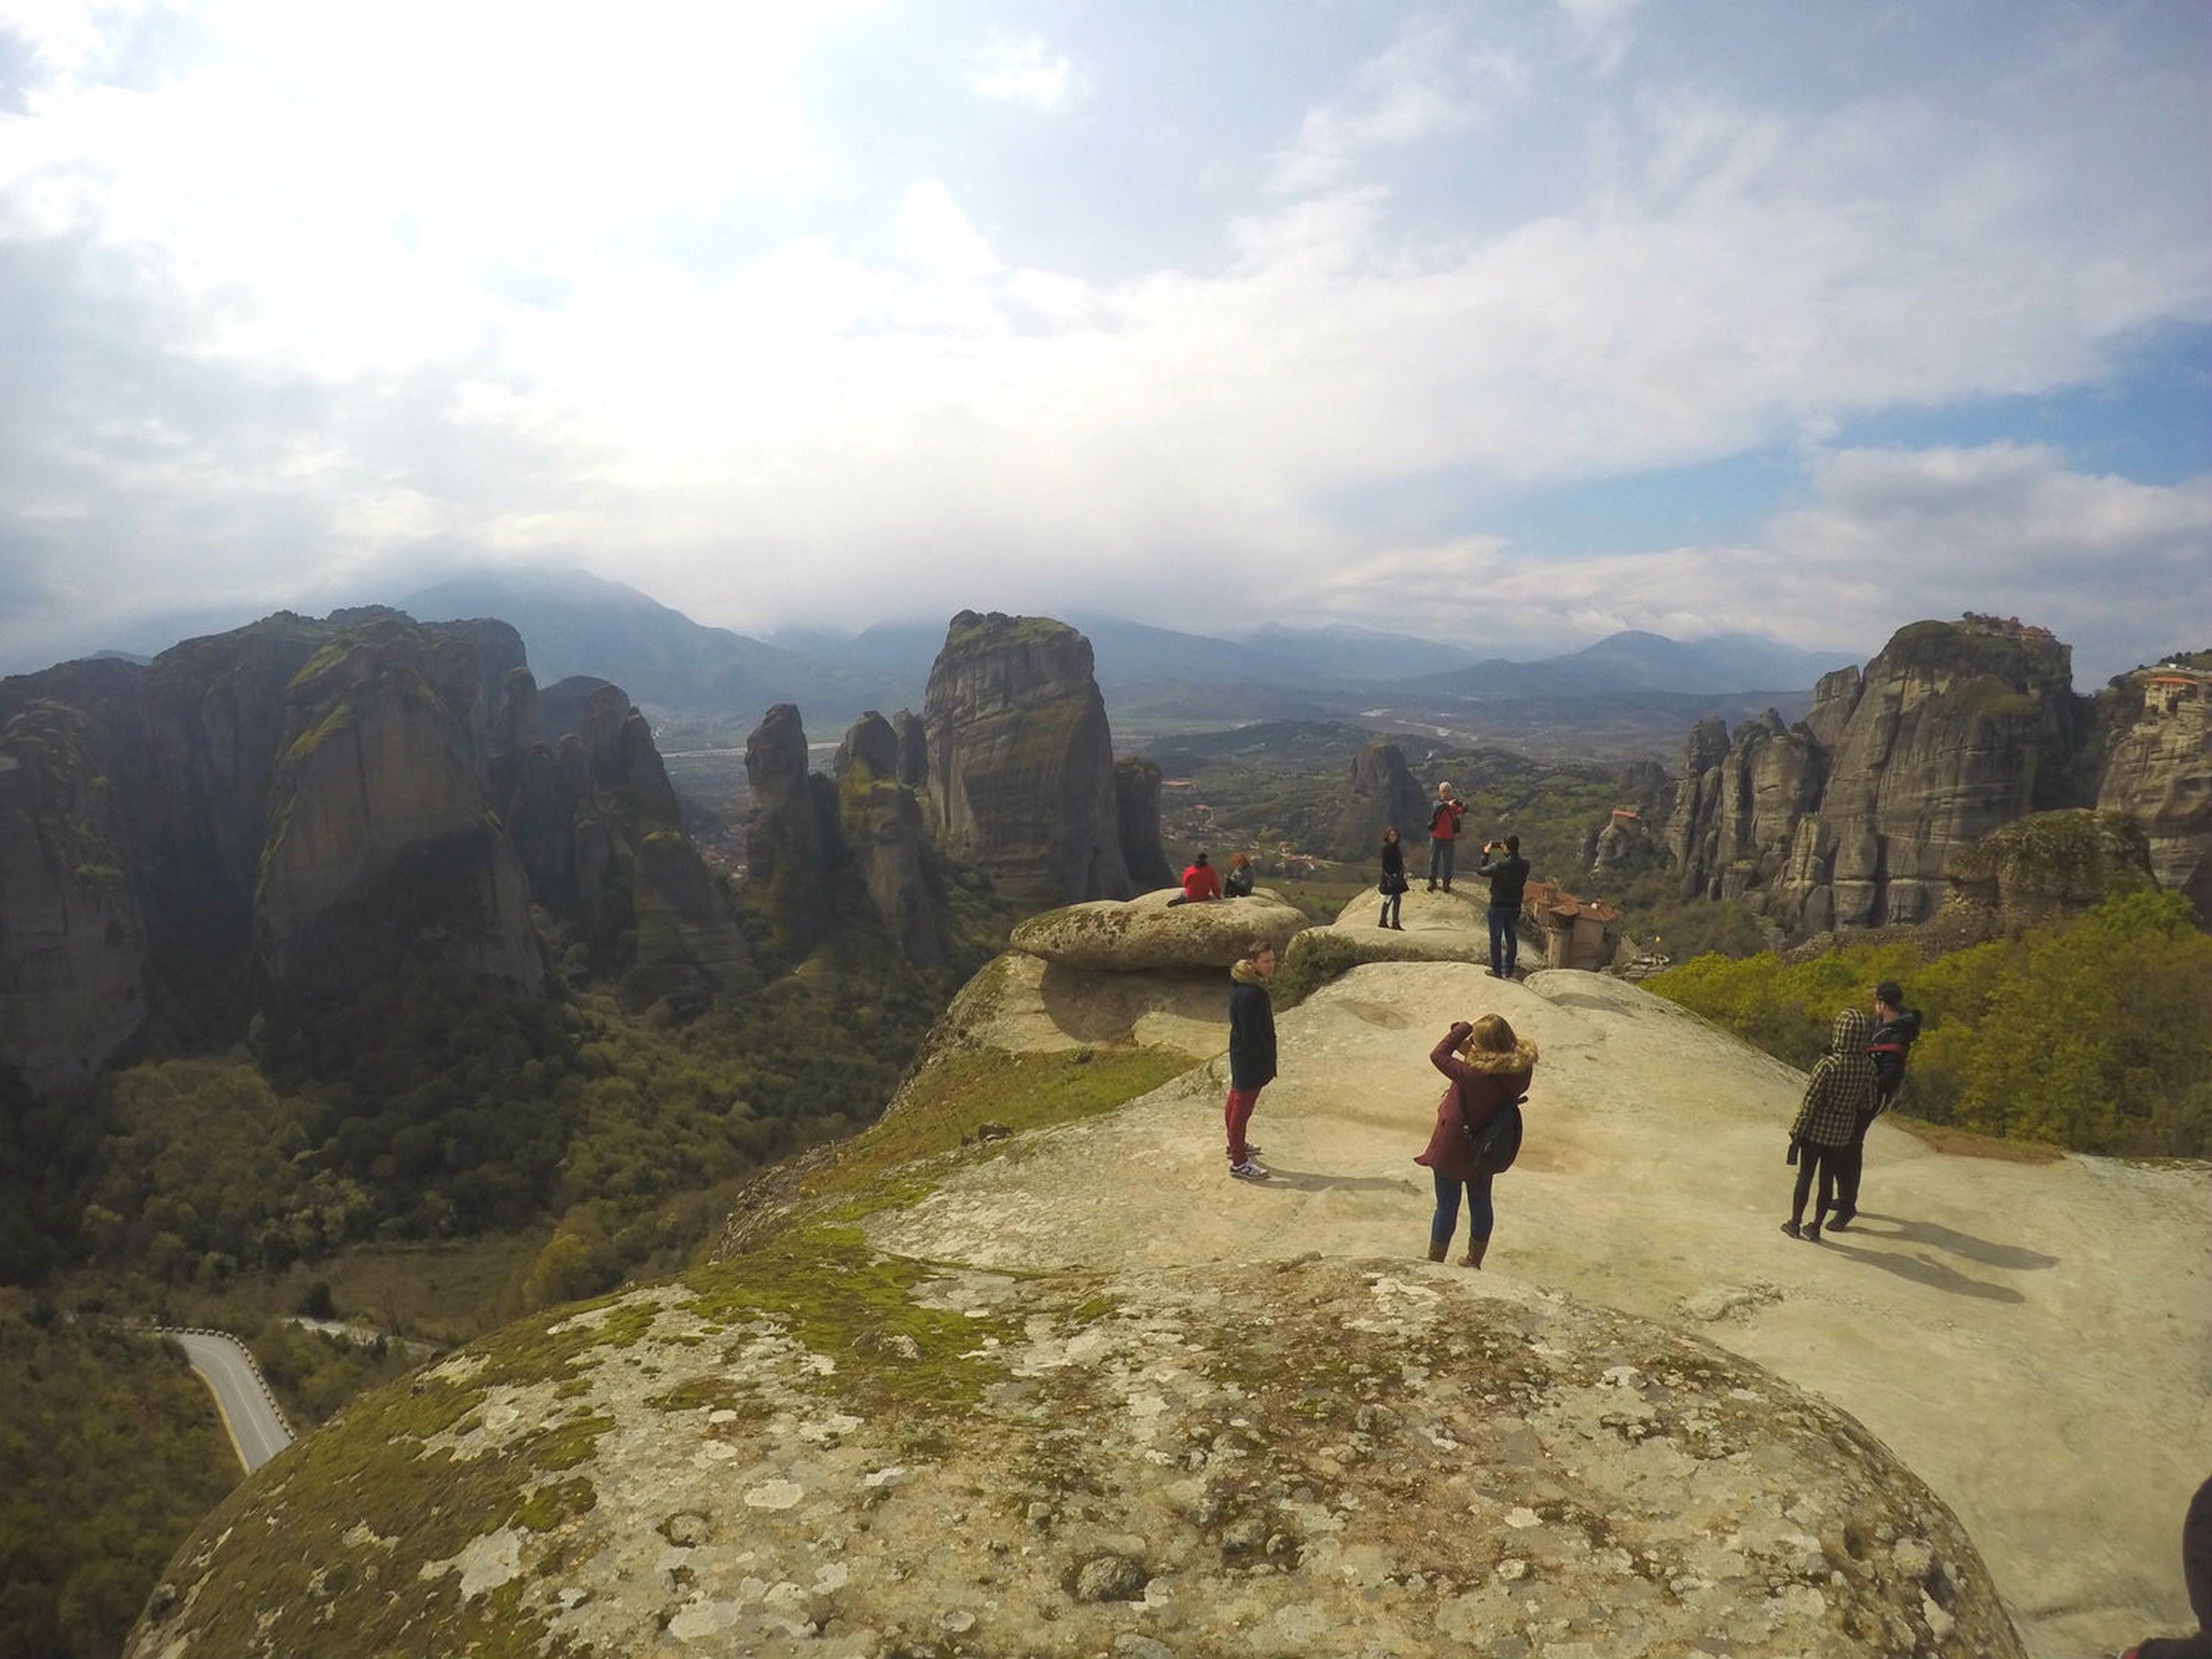 Group of tourists on a rock formation, observing the Meteora views in Greece